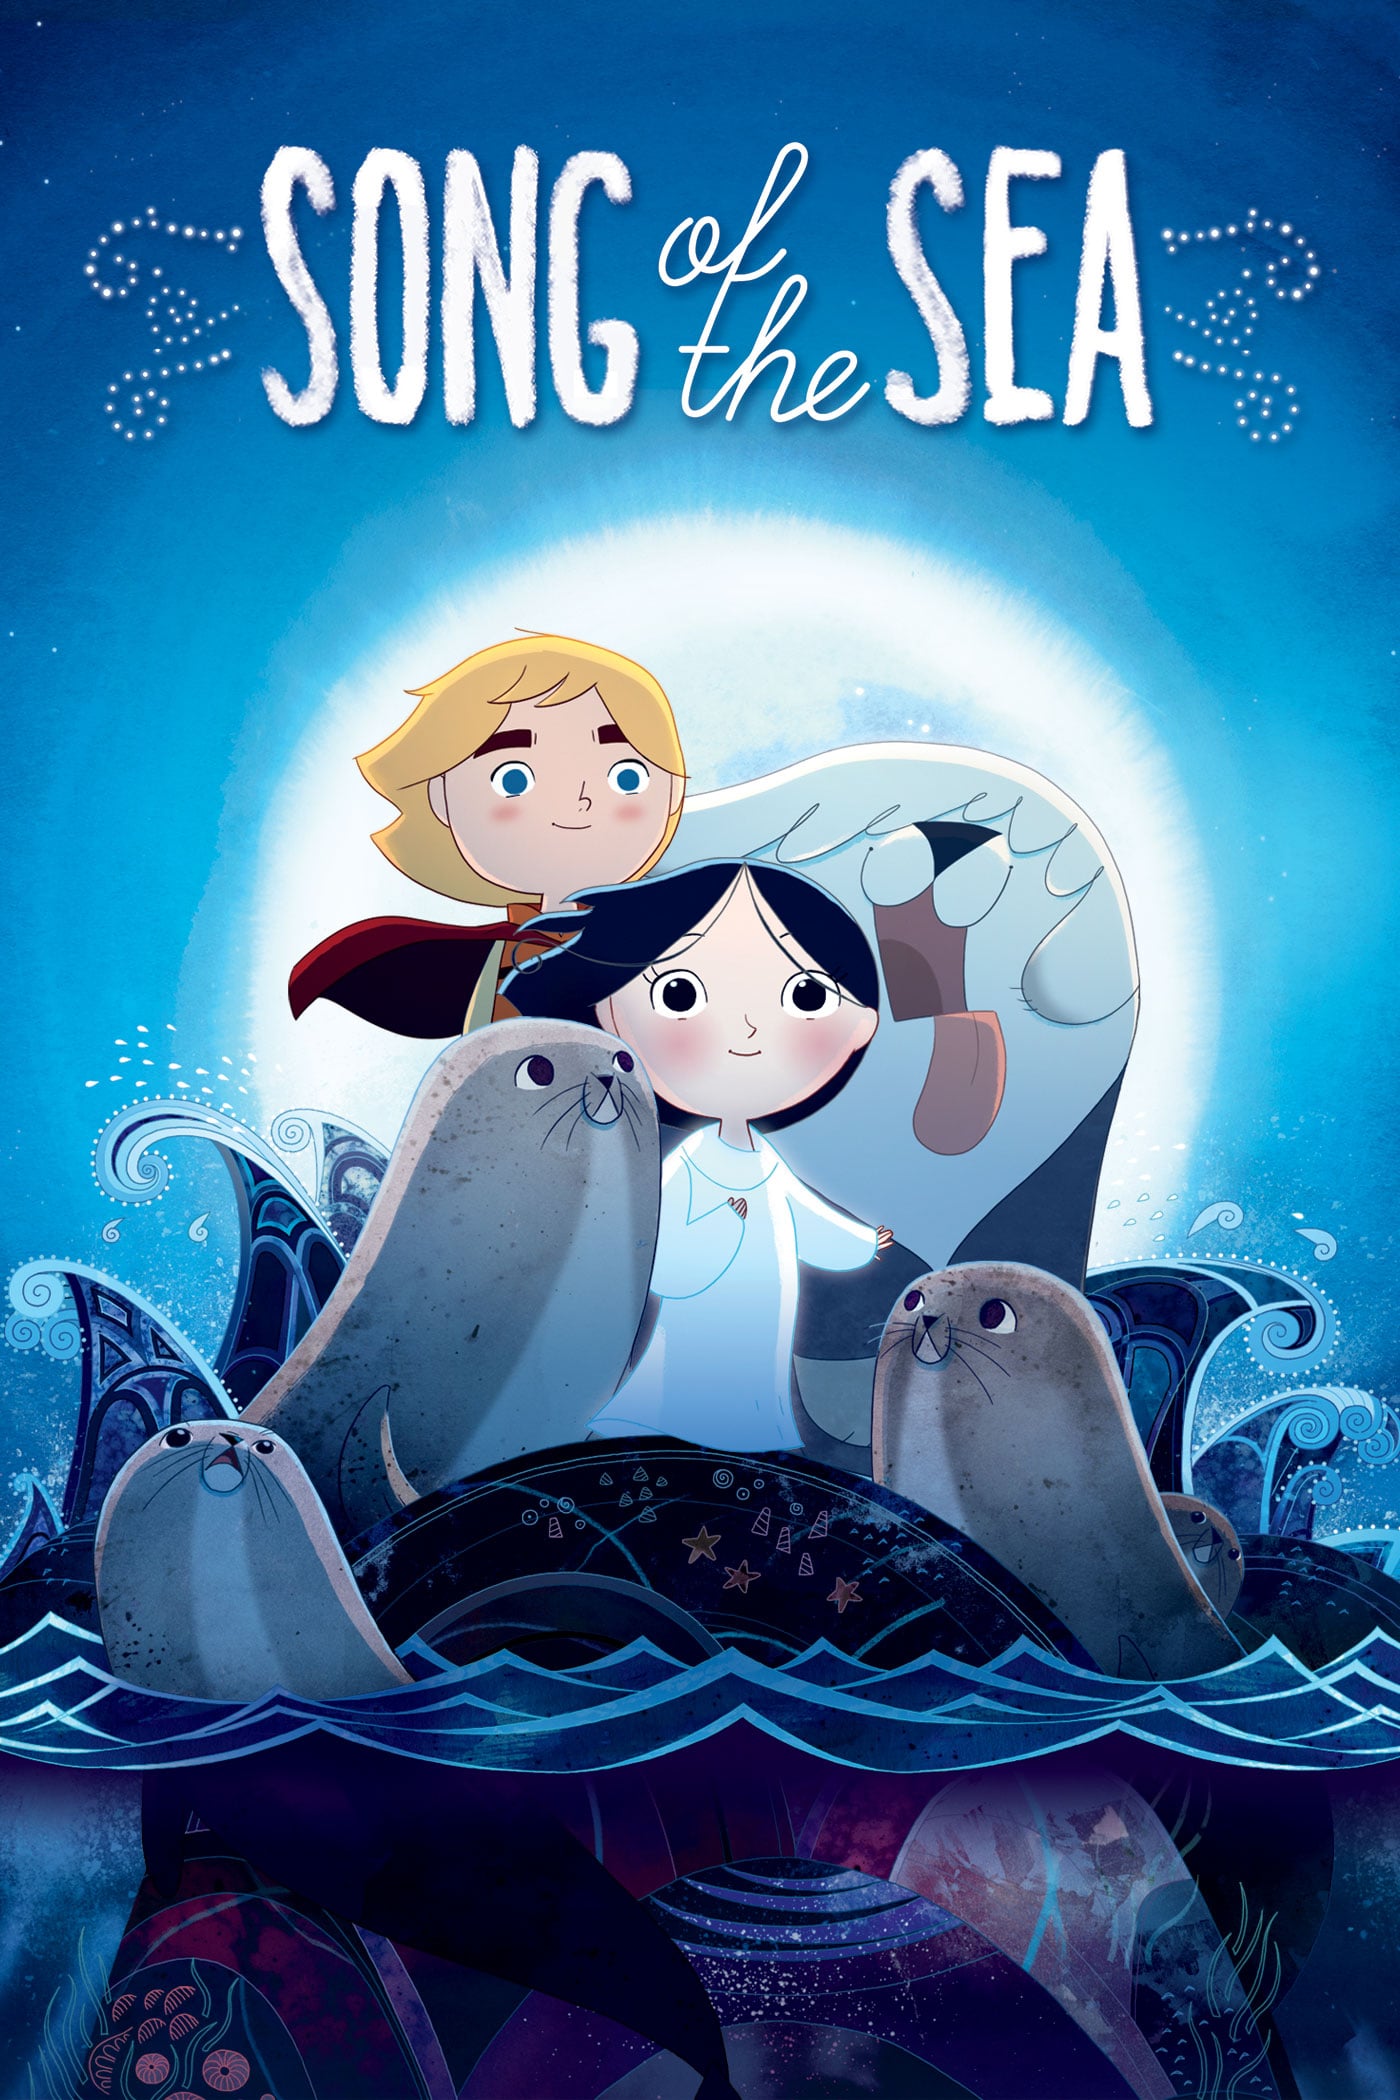 Poster for the movie "Song of the Sea"